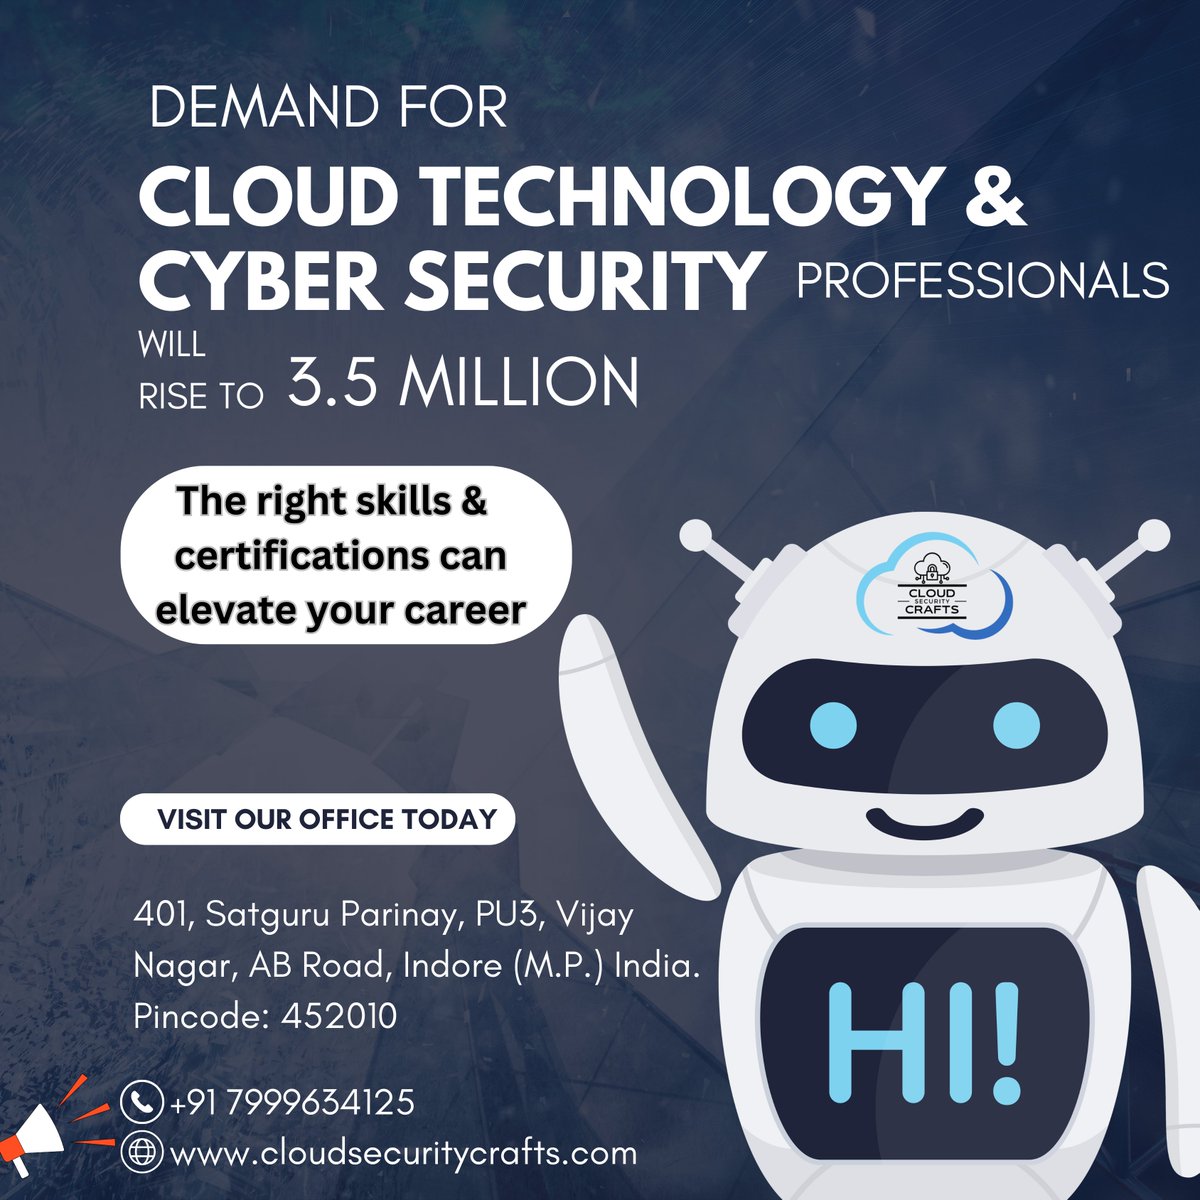 Cloud security crafts is powering Indore’s techade, the organization is driving a nationwide deep-tech skilling revolution.

#cloudsecuritycrafts #cloudsecurity #education #CertificationPrograms #ITTraining #indore #JobOpportunities #ittechnology #cloudcomputingcourses #aws23